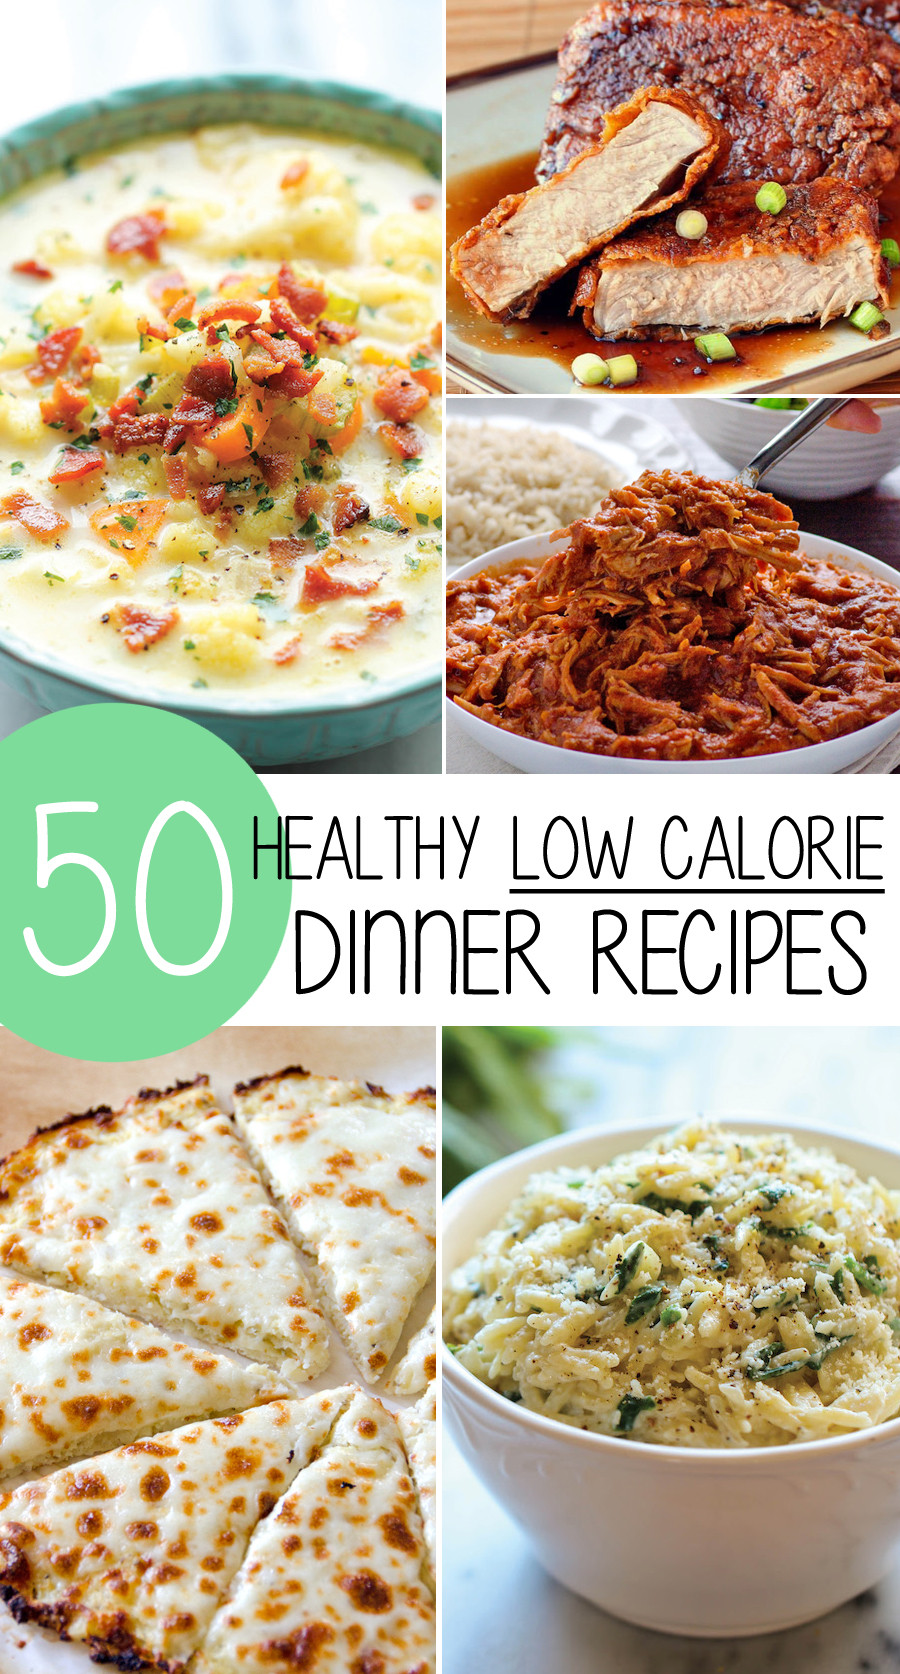 Delicious Low Calorie Dinners
 50 Healthy Low Calorie Weight Loss Dinner Recipes